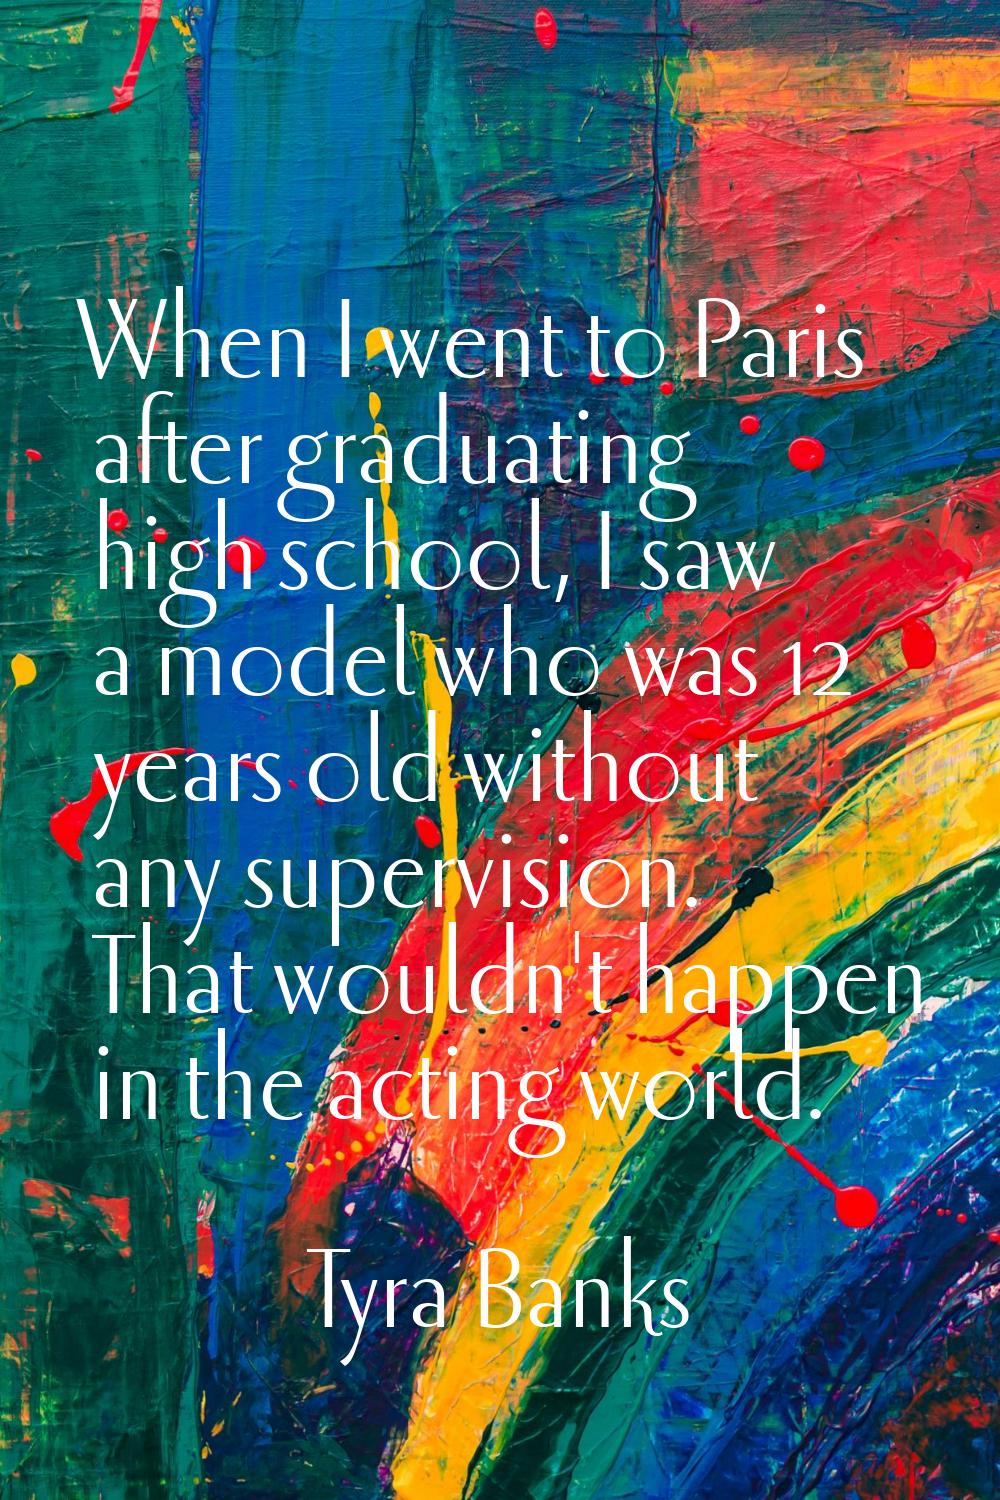 When I went to Paris after graduating high school, I saw a model who was 12 years old without any s